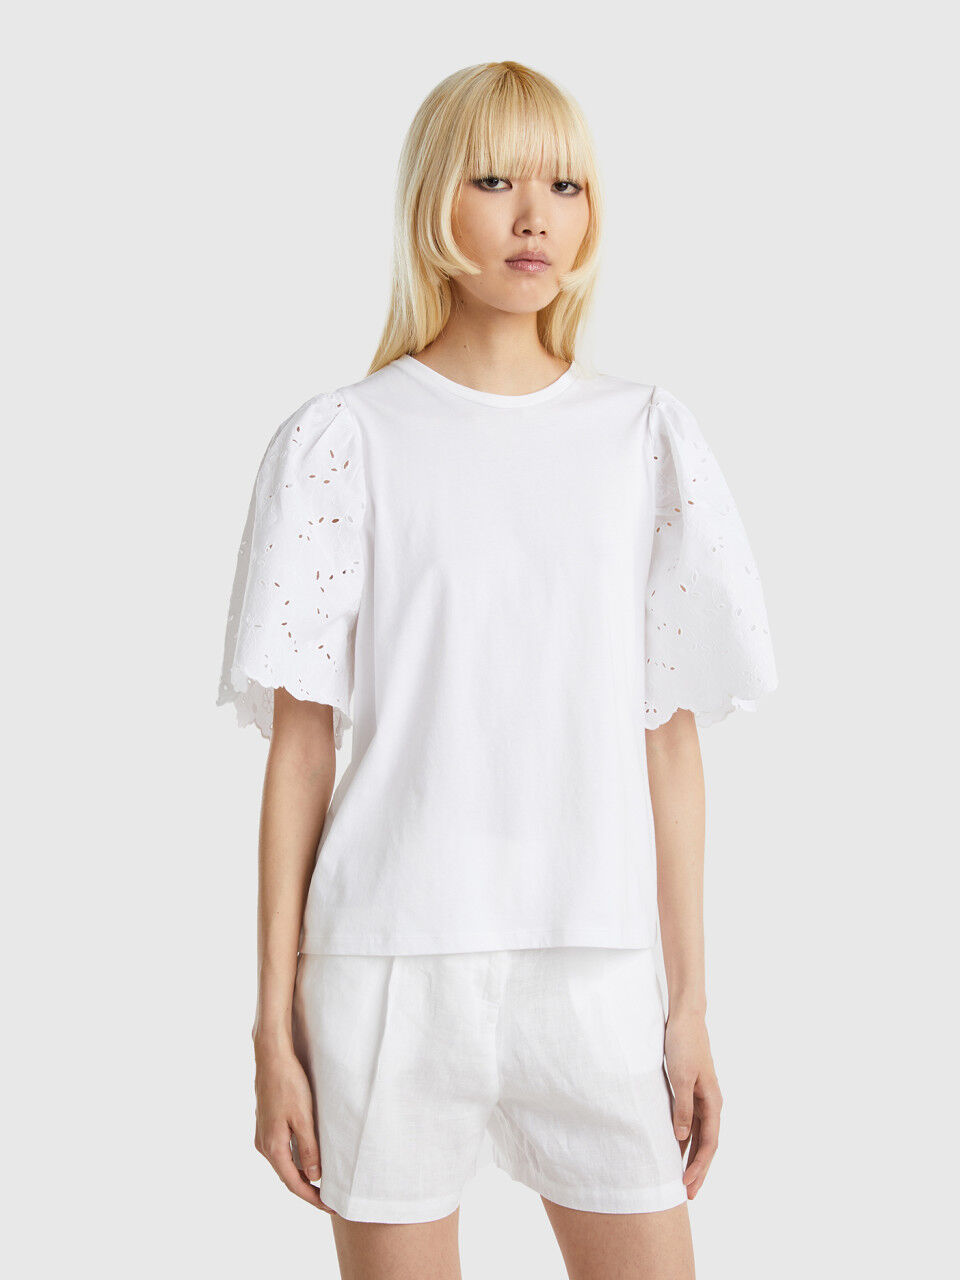 T-shirt with sleeves in broderie anglaise